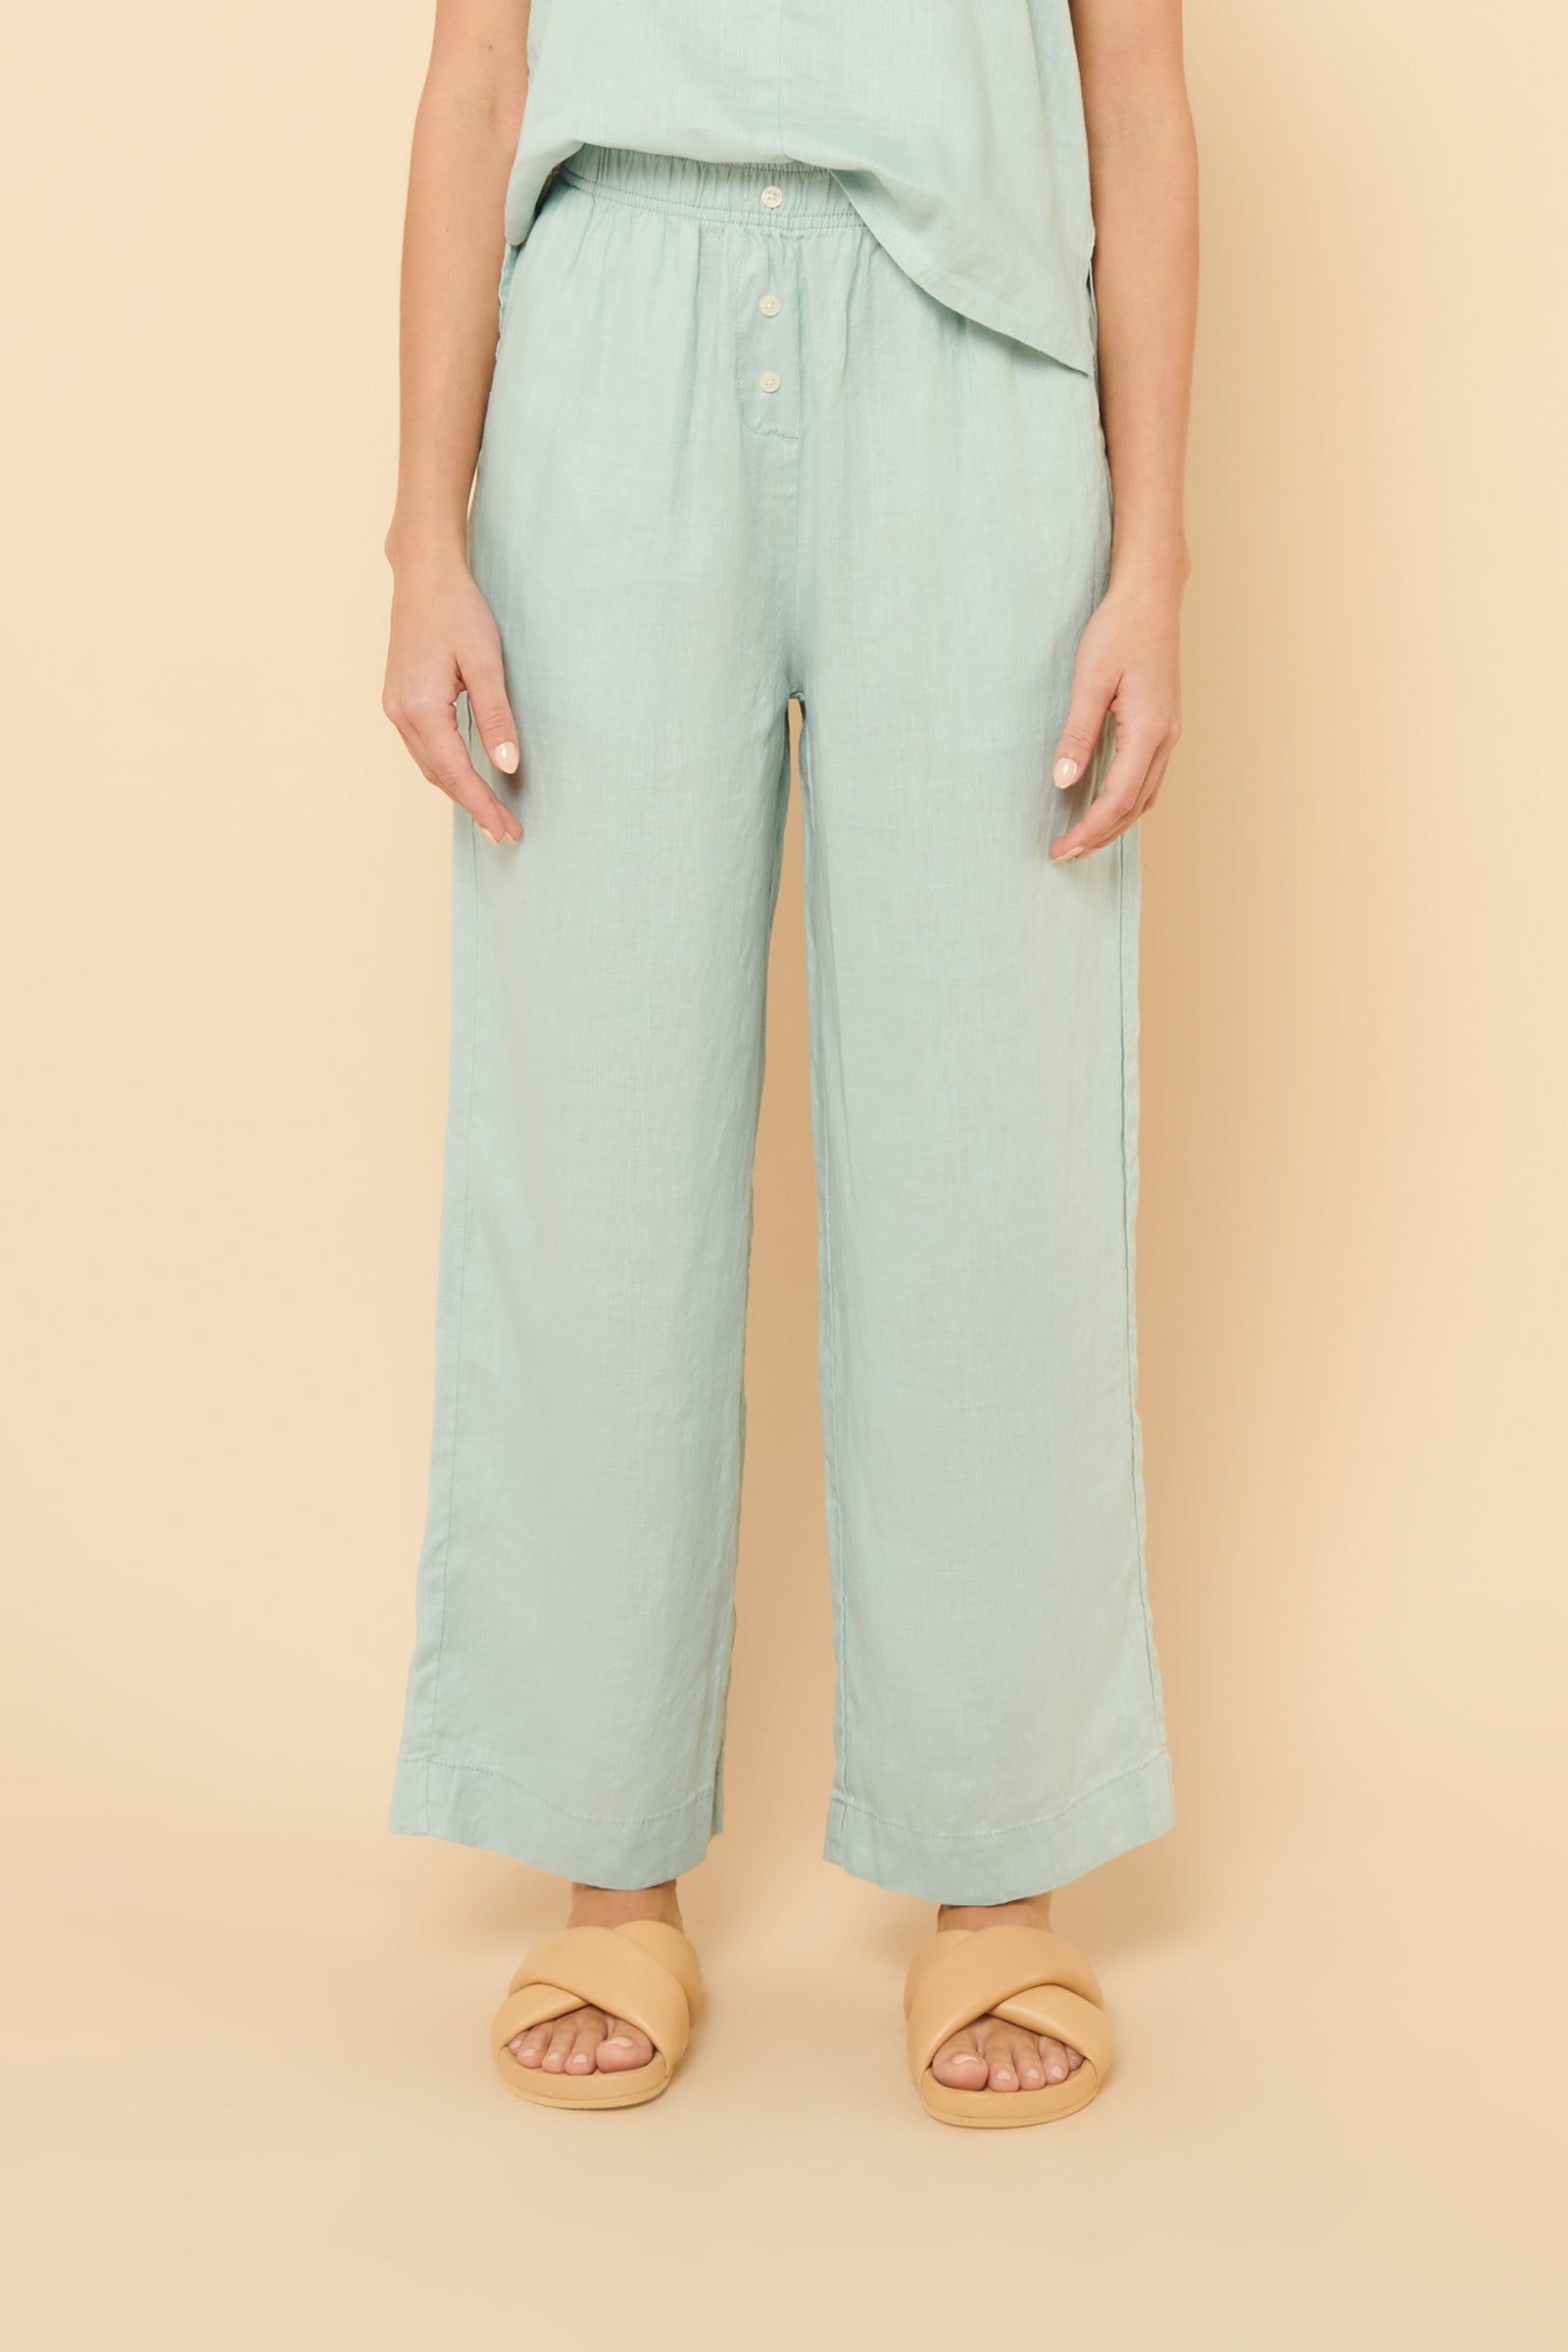 Nude Lucy Lounge Linen Crop Pant In A Blue Lagoon Colour 